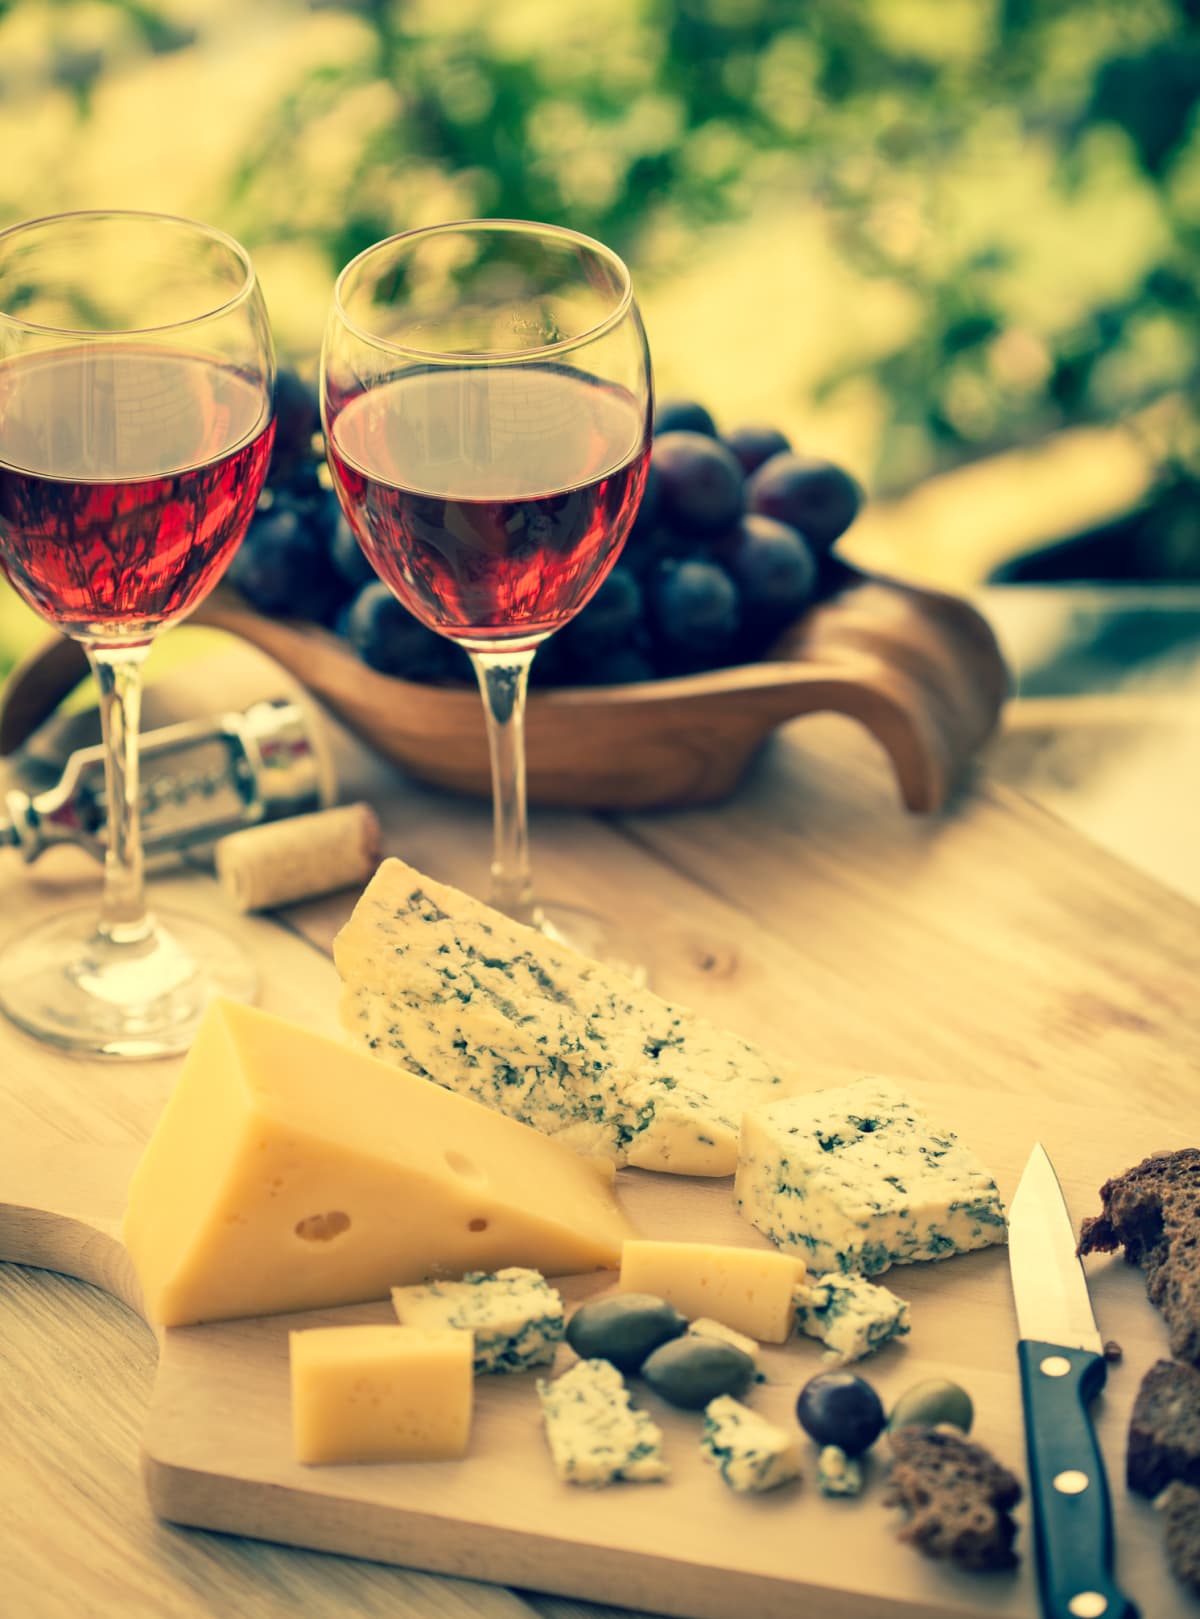 two glasses of red wine with grapes and cheese on a wooden cutting board